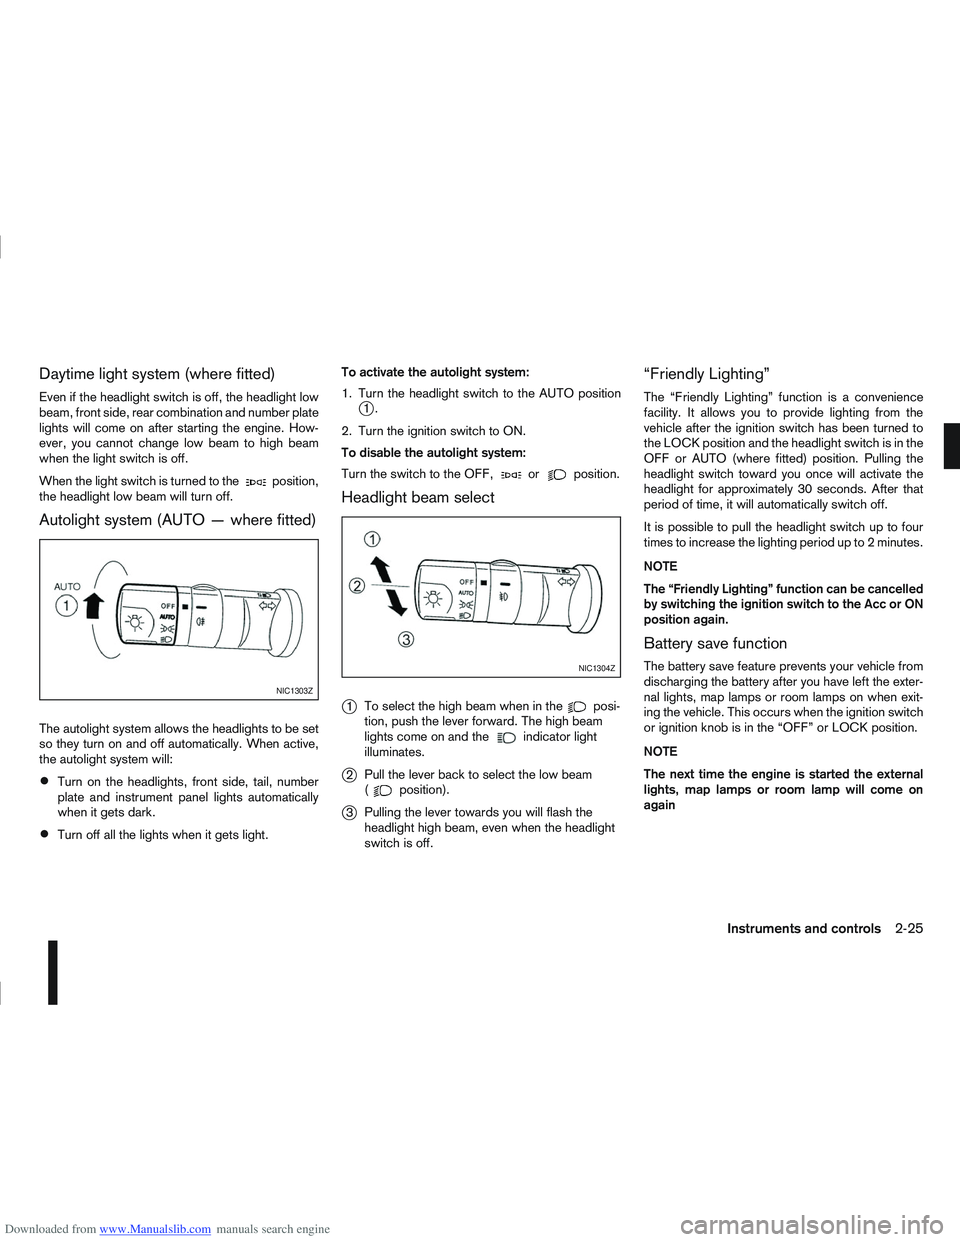 NISSAN QASHQAI 2007  Owners Manual Downloaded from www.Manualslib.com manuals search engine Daytime light system (where fitted)
Even if the headlight switch is off, the headlight low
beam, front side, rear combination and number plate
